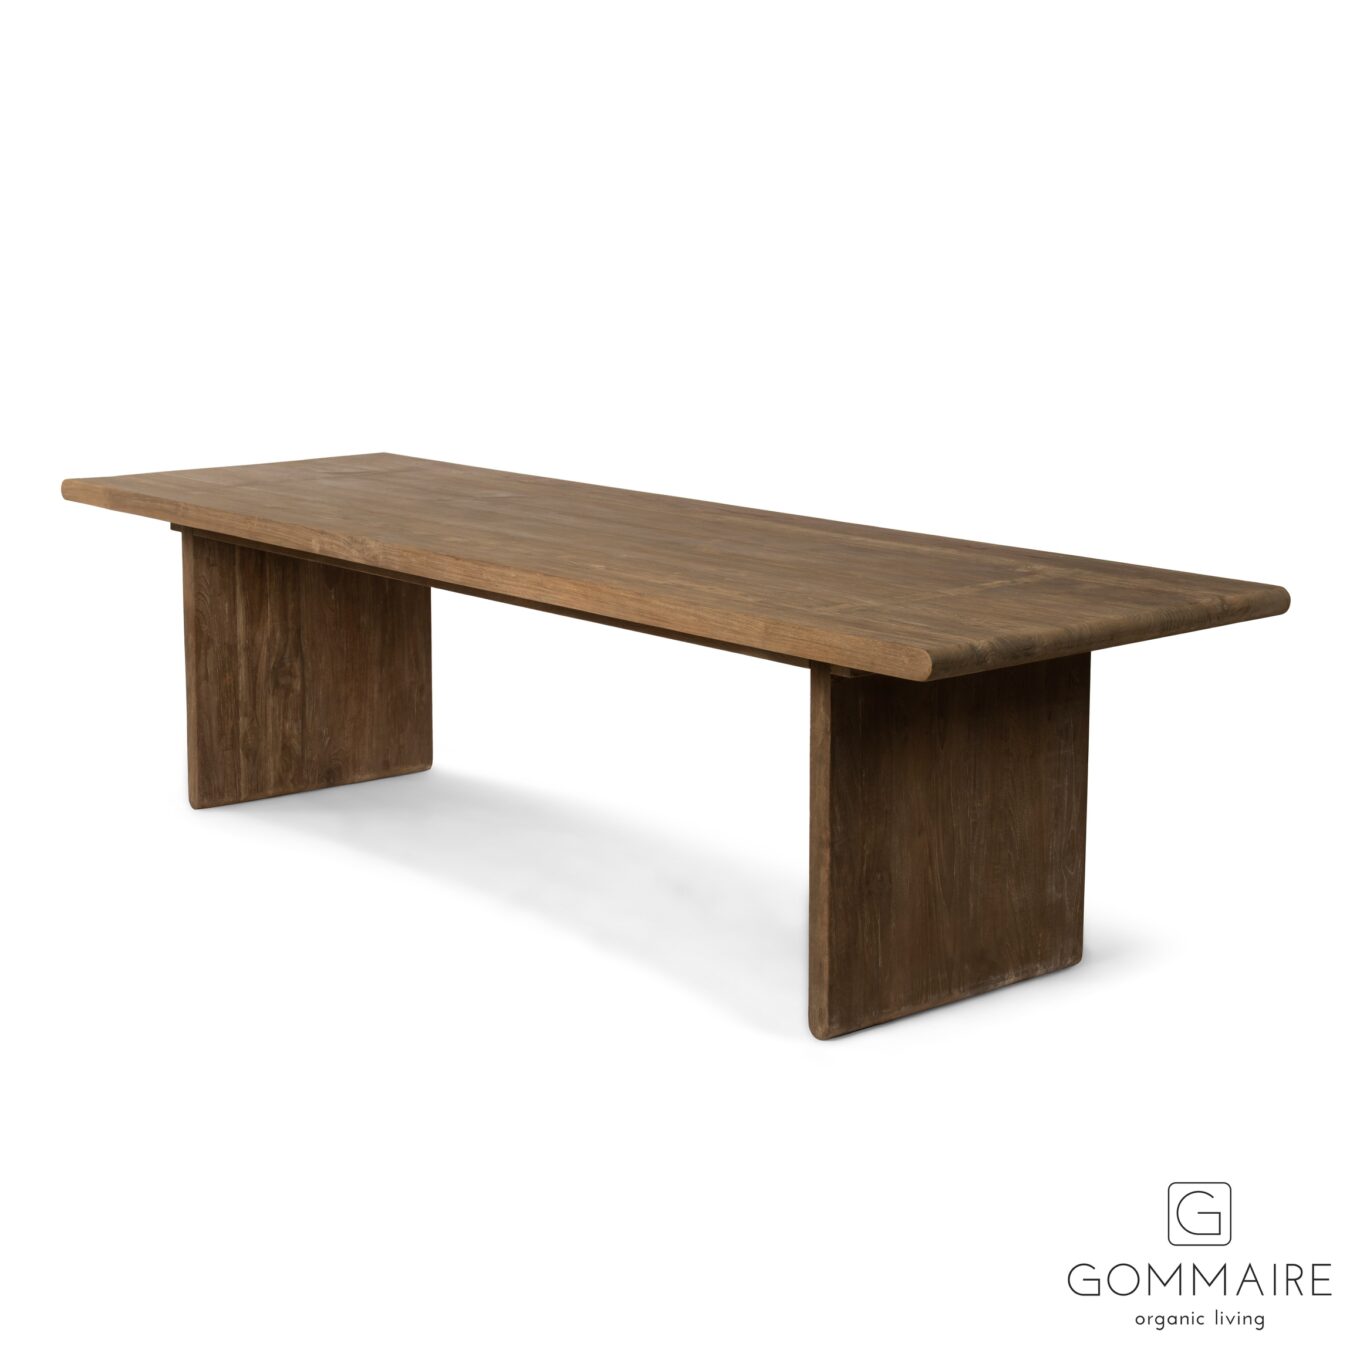 Koop DRAKE DINING TABLE by GOMMAIRE